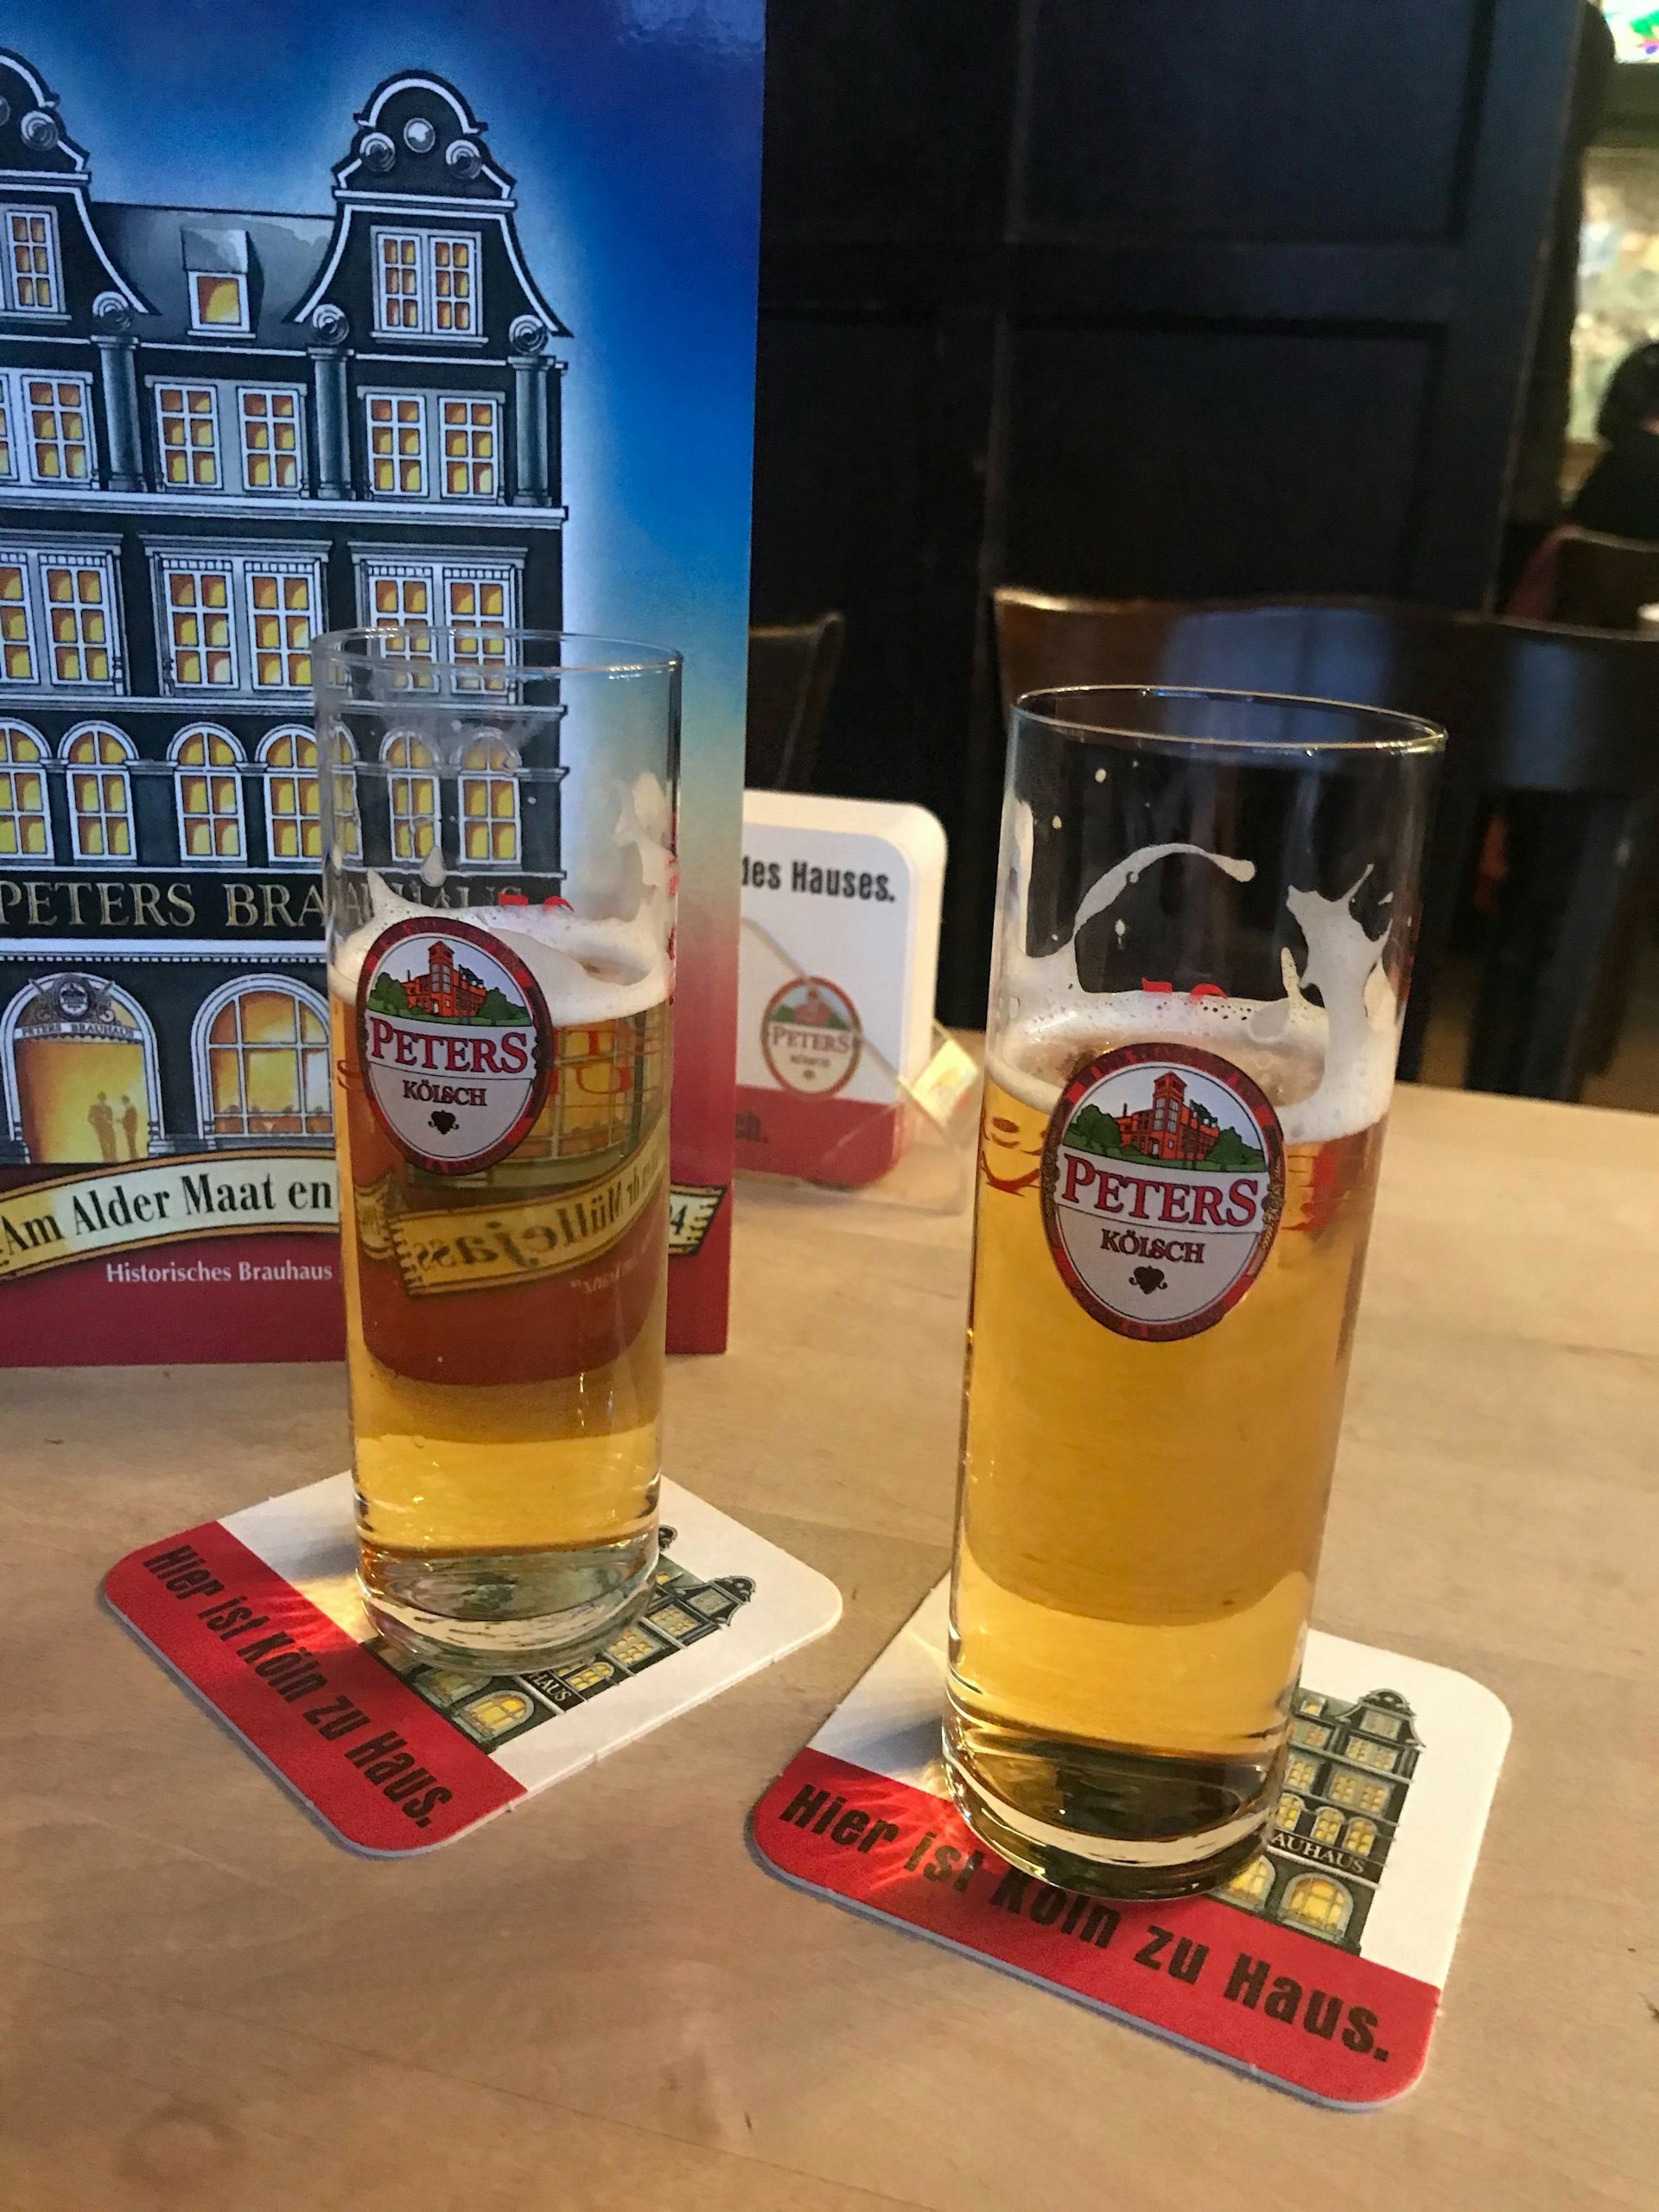 Two small glasses of beer